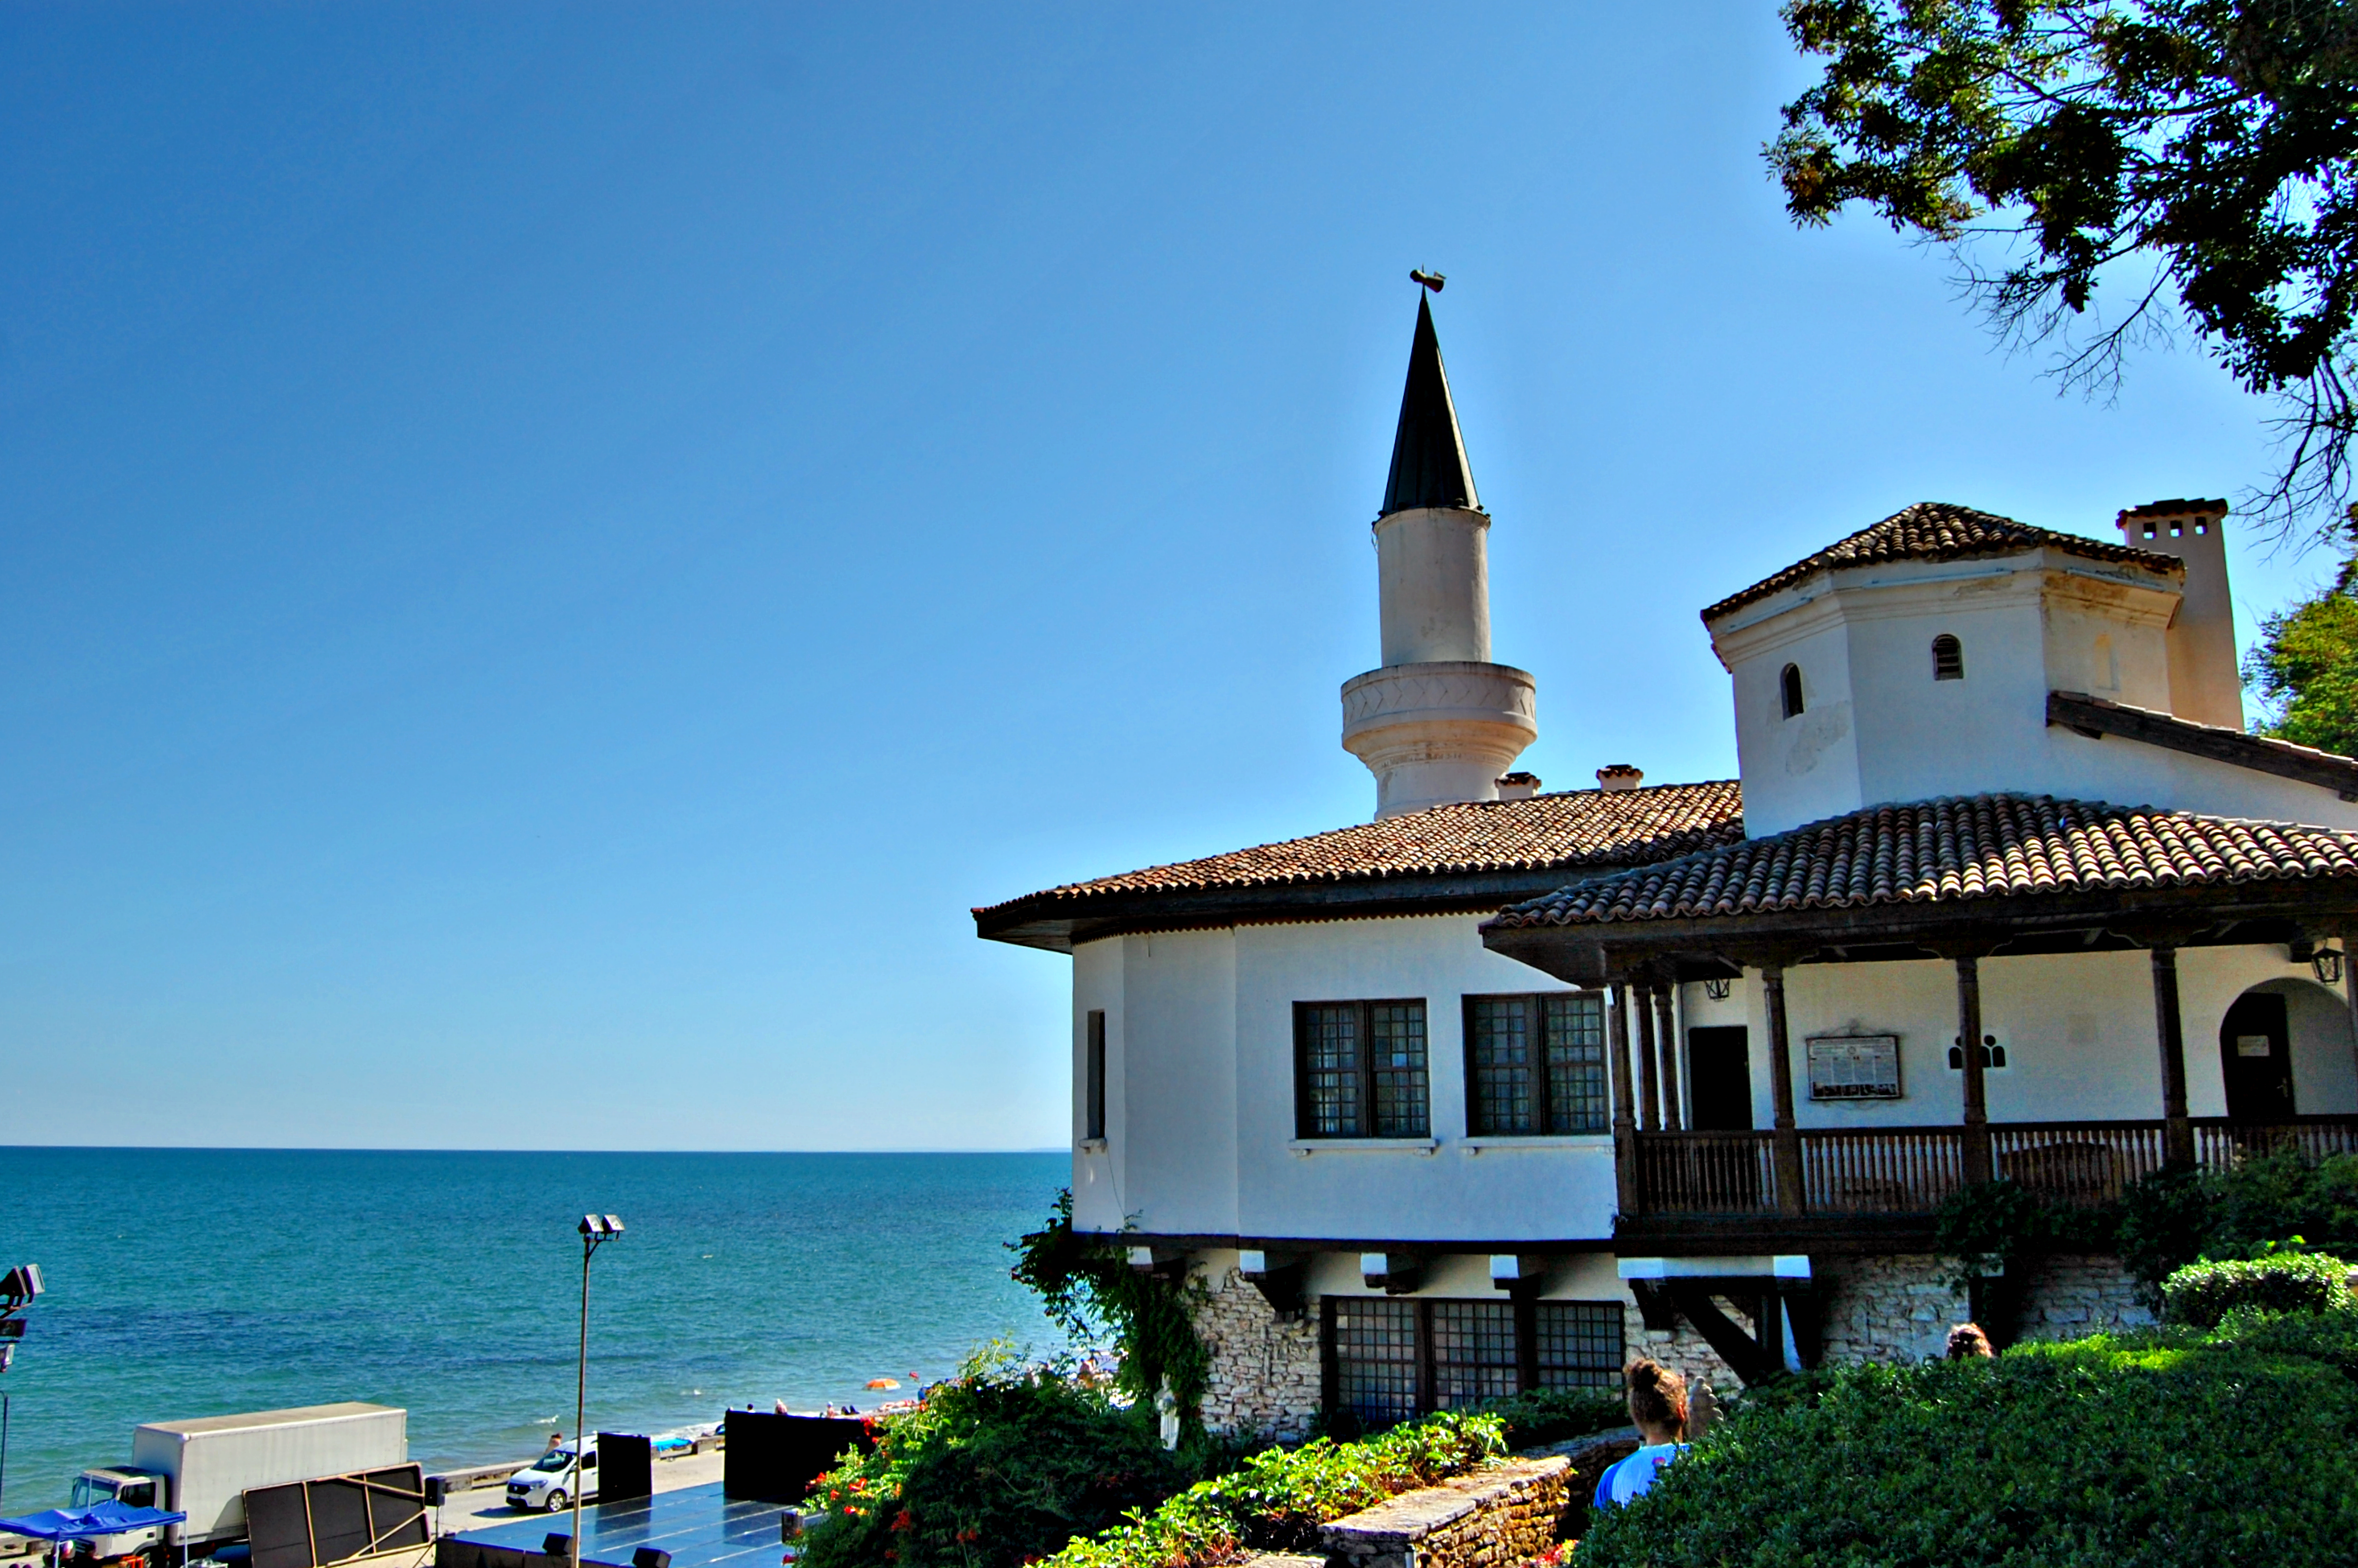 The most romantic place you did not know about - Balchik botanical gardens and palace, Bulgaria